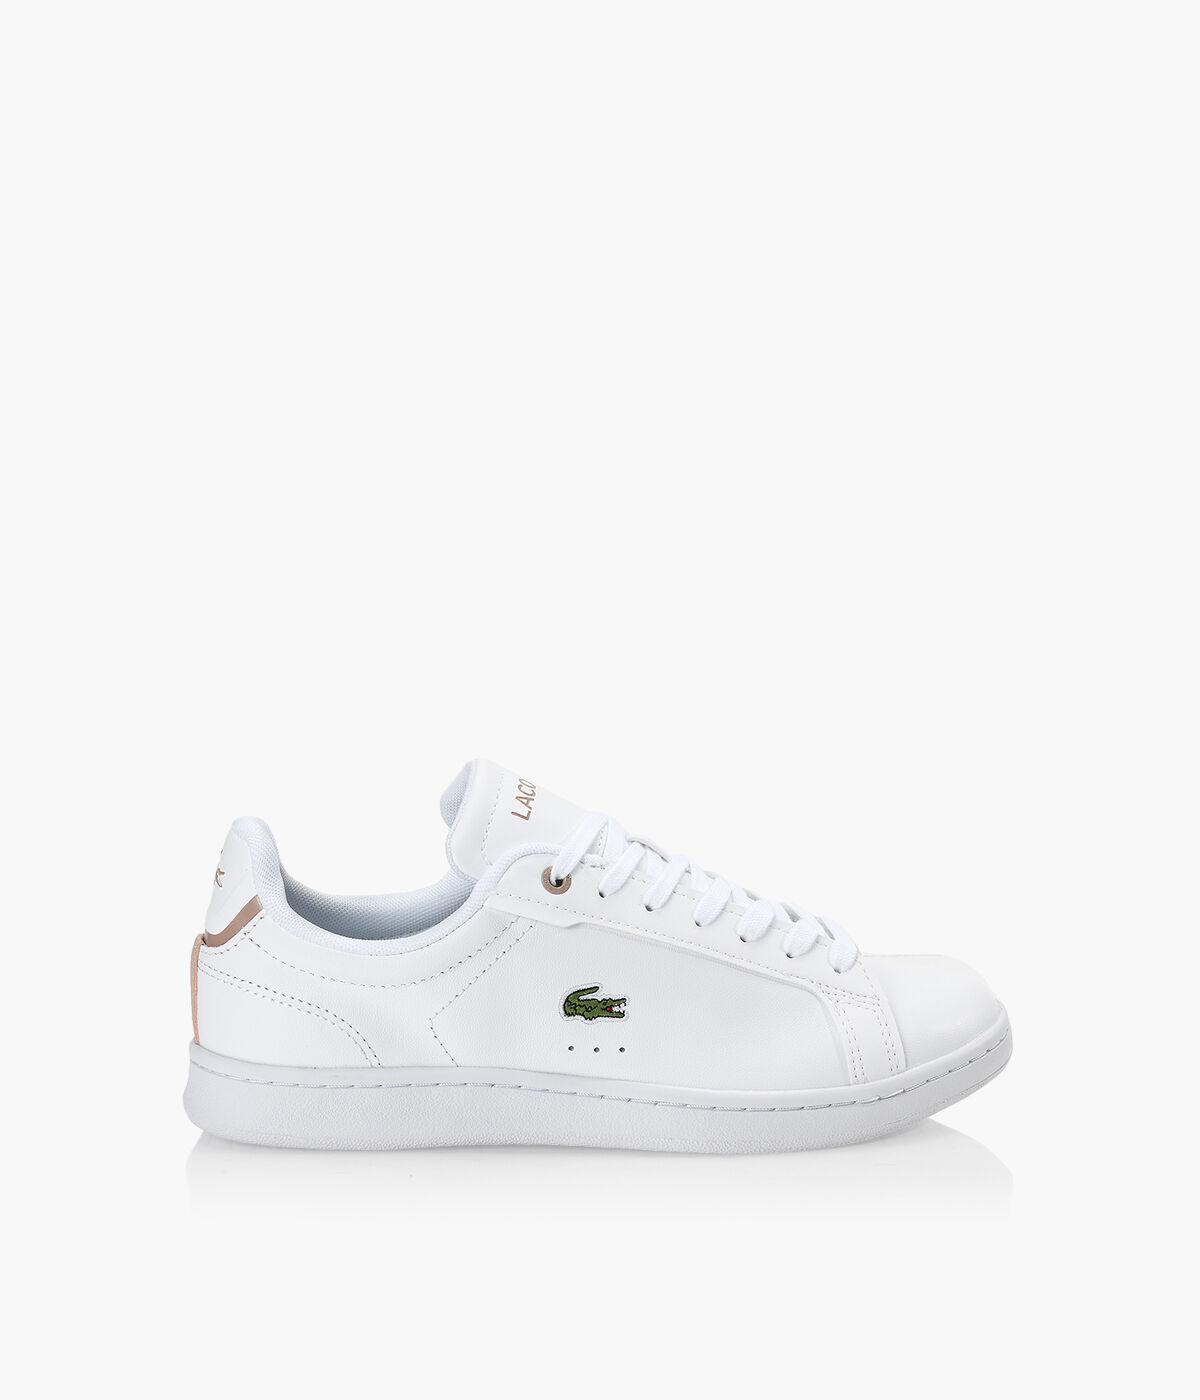 Shoes For Men | Lacoste Shoes for Men in Egypt | Lacoste Egypt